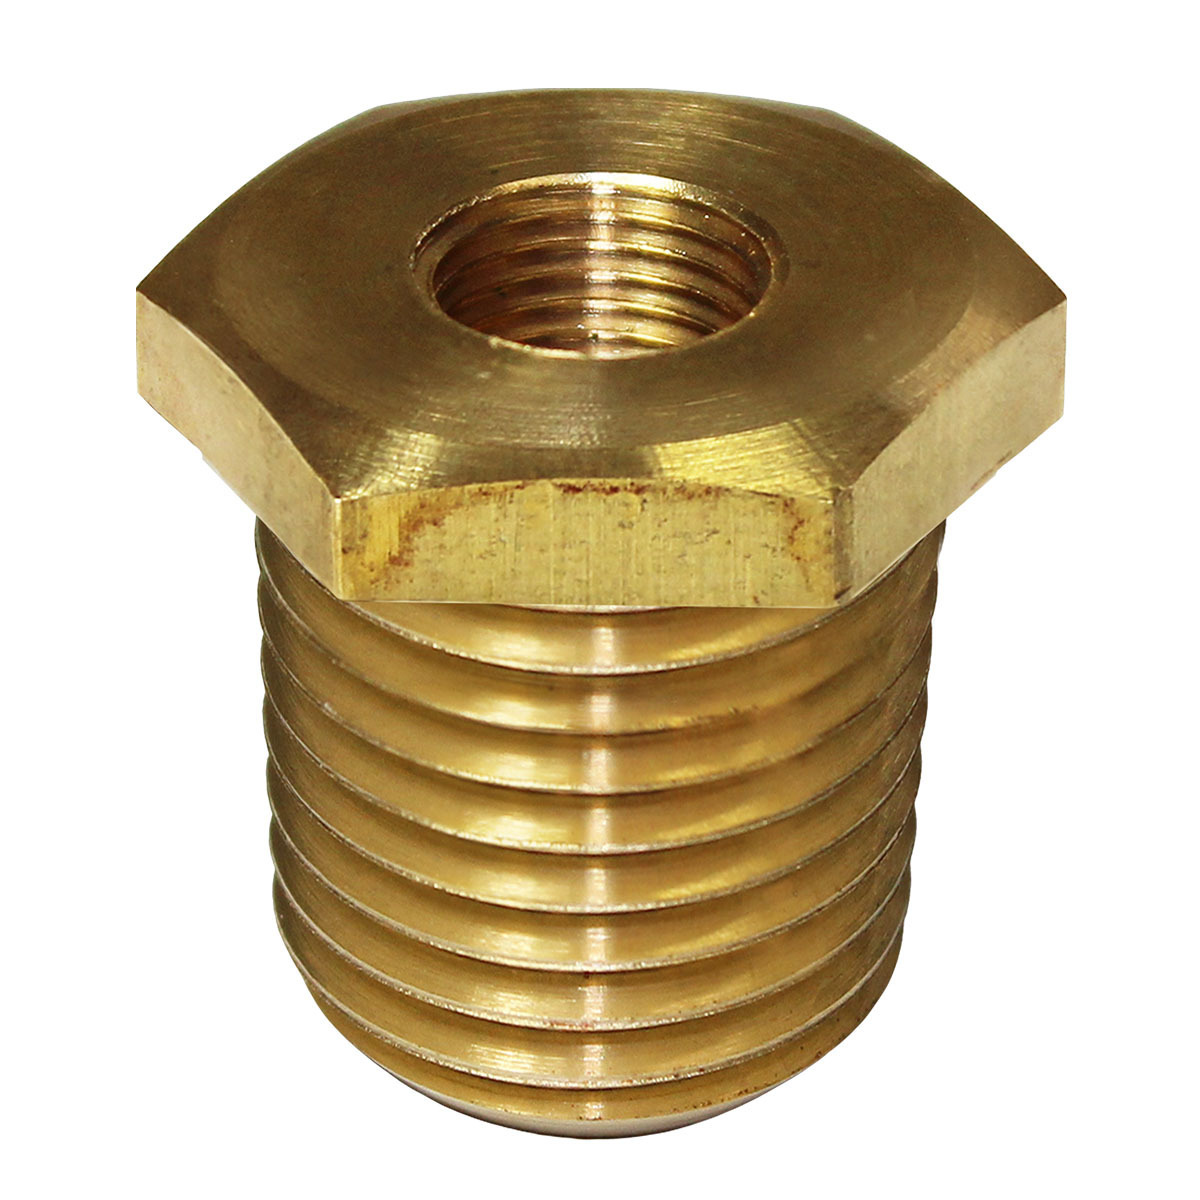 Details about  / SAAS Oil Gauge adaptor M16 x 1.5 with 1//8NPT